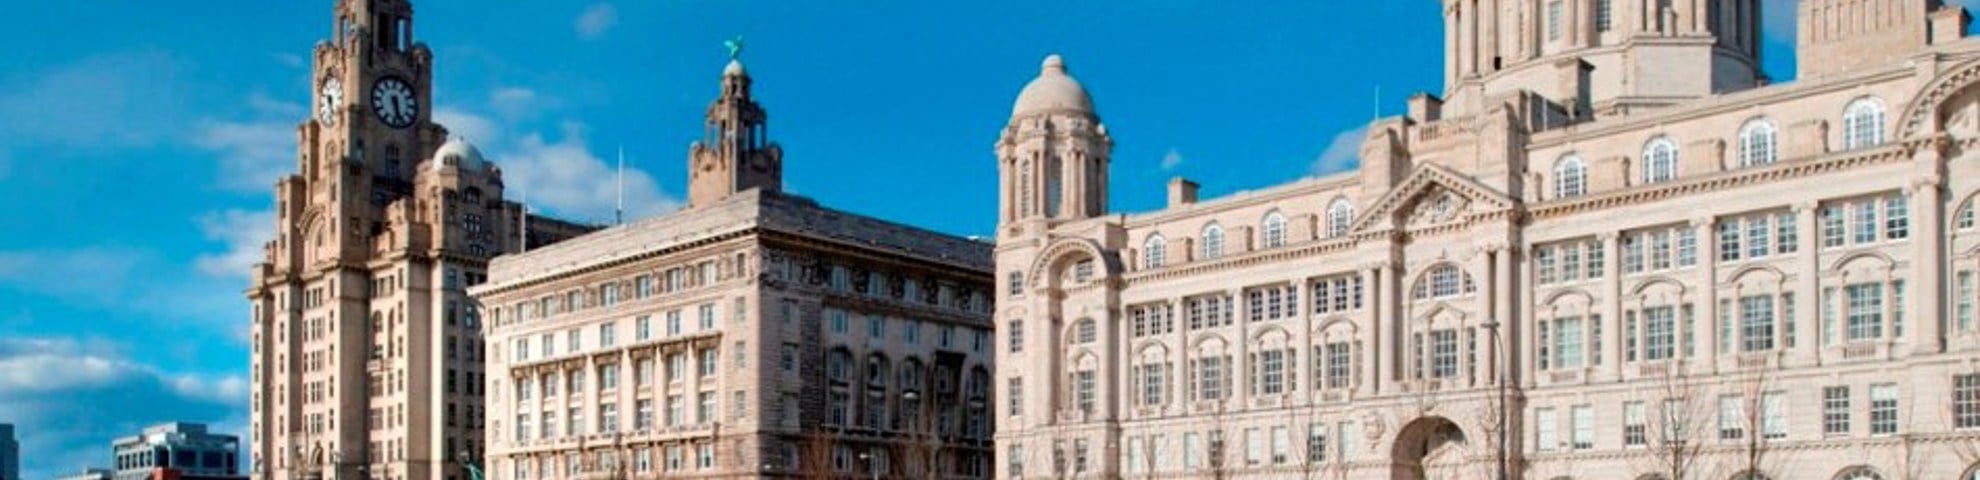 The exteriors of two large buildings at the Pier Head.